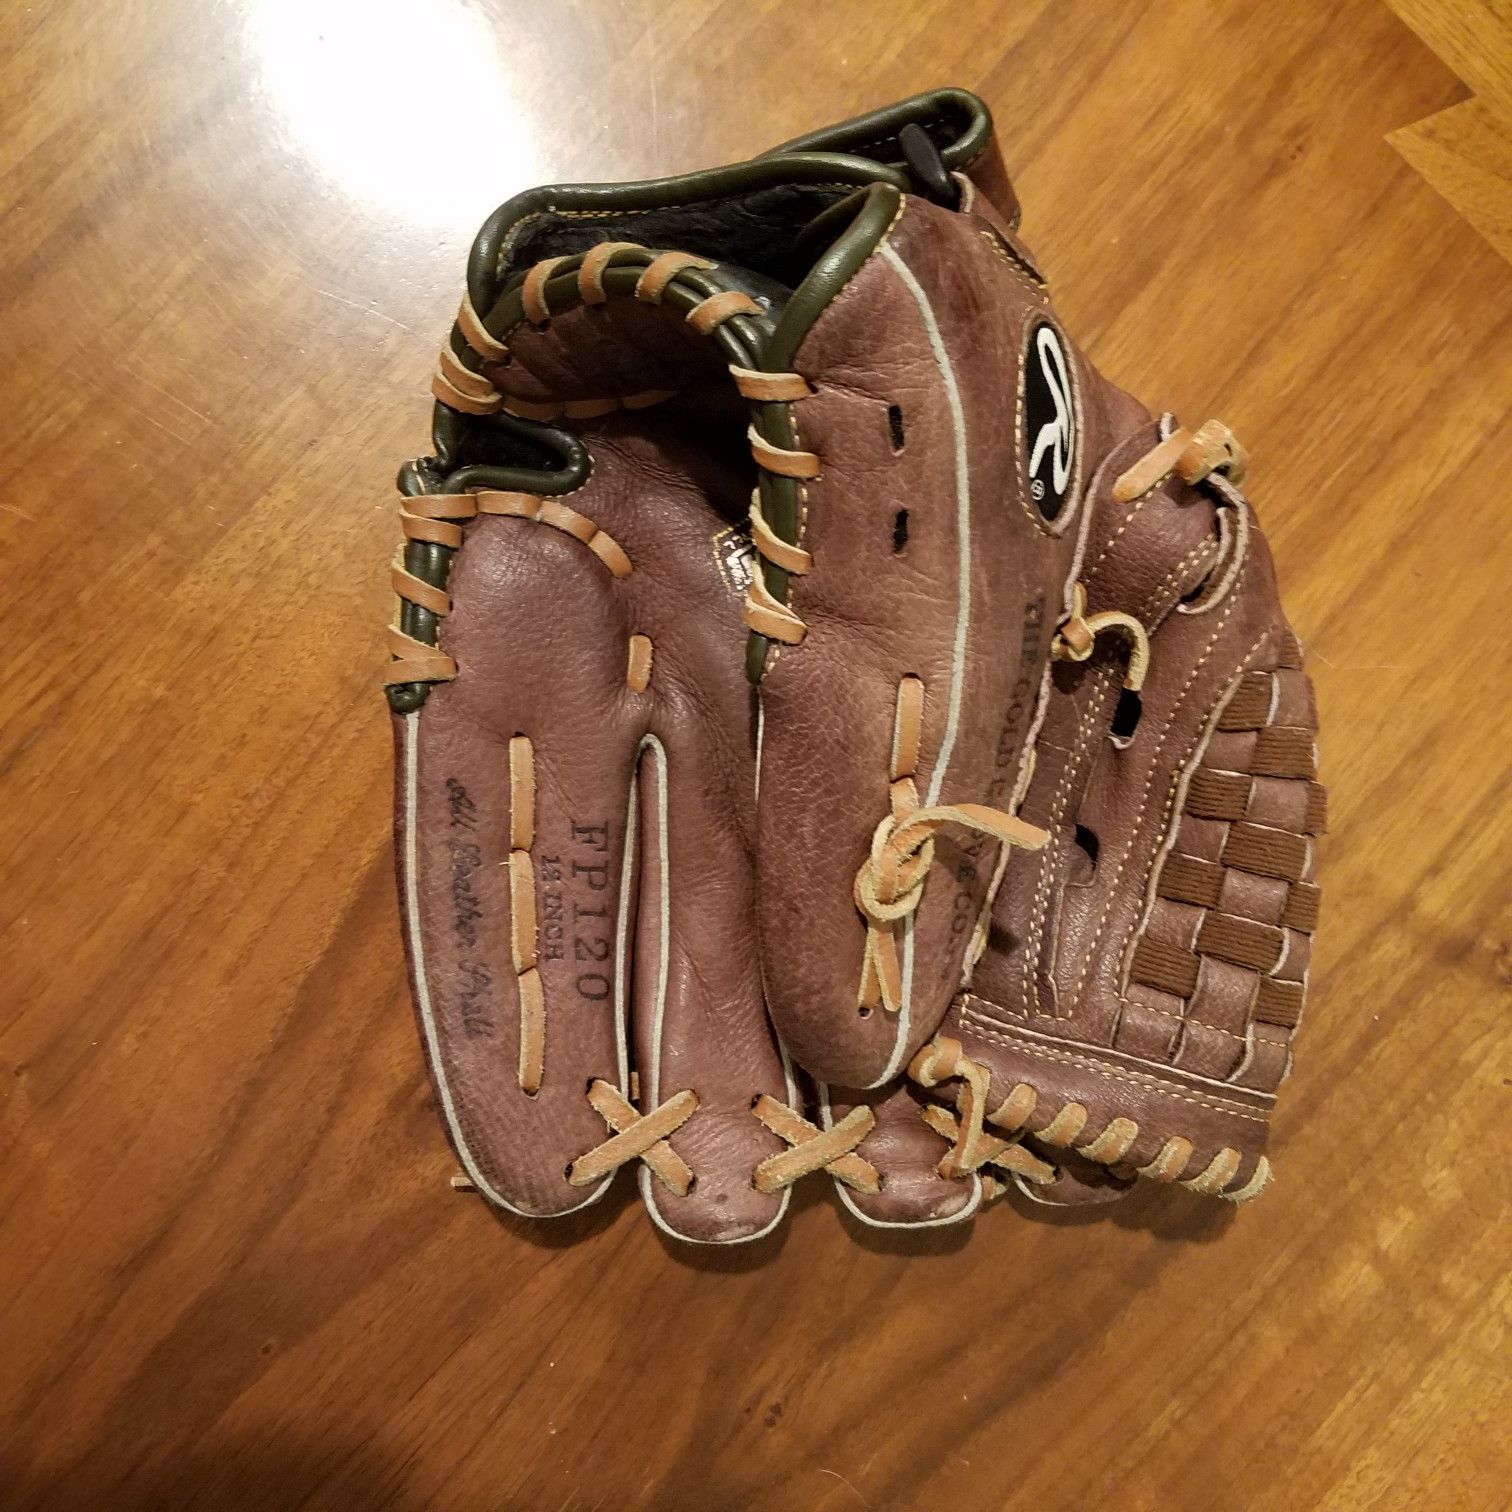 Rawlings Softball Glove FP120 12 Inch All Leather Shell